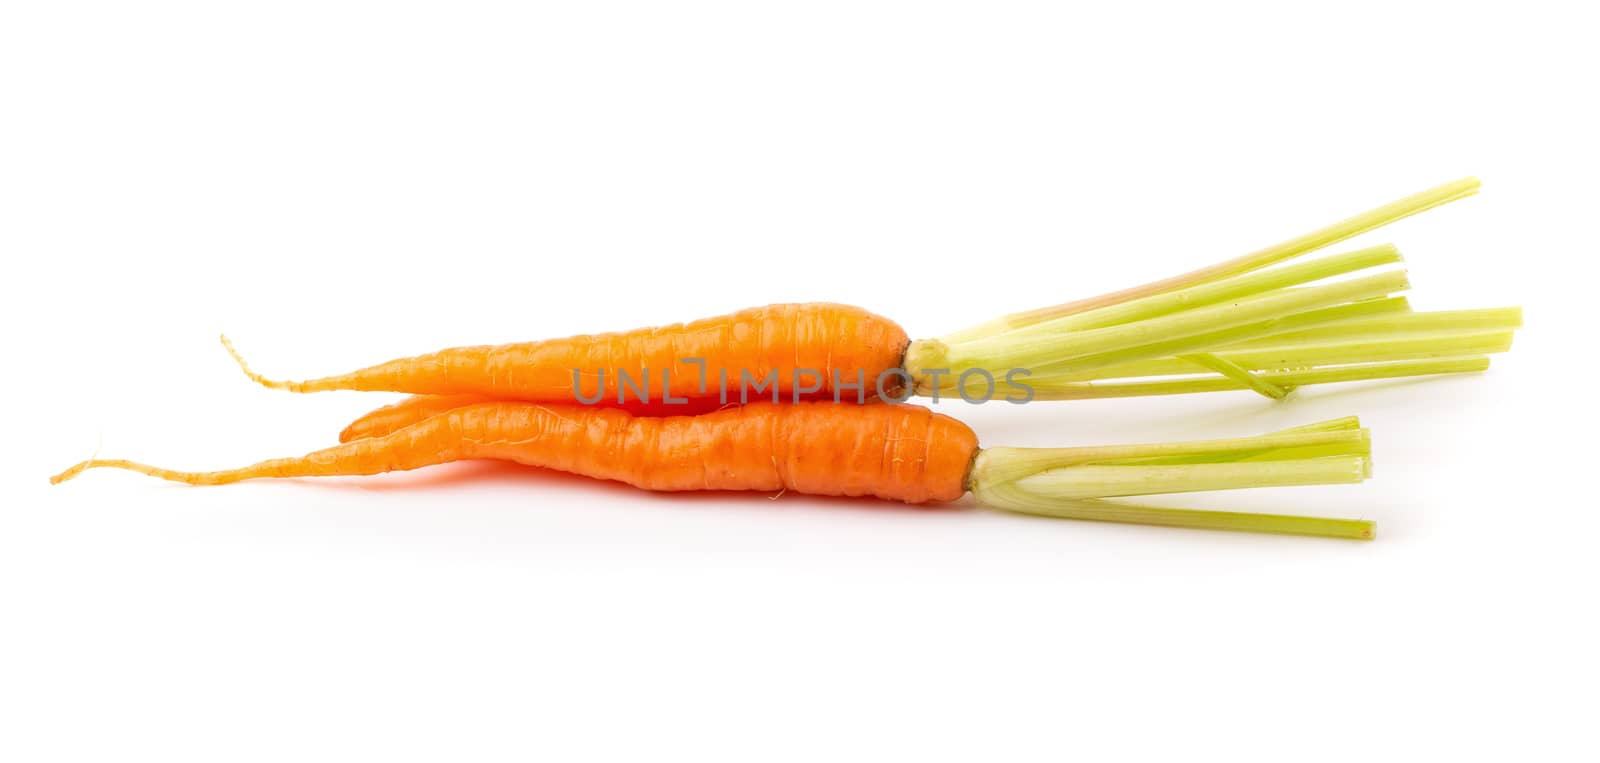 Fresh baby carrots isolated on a white background by kaiskynet